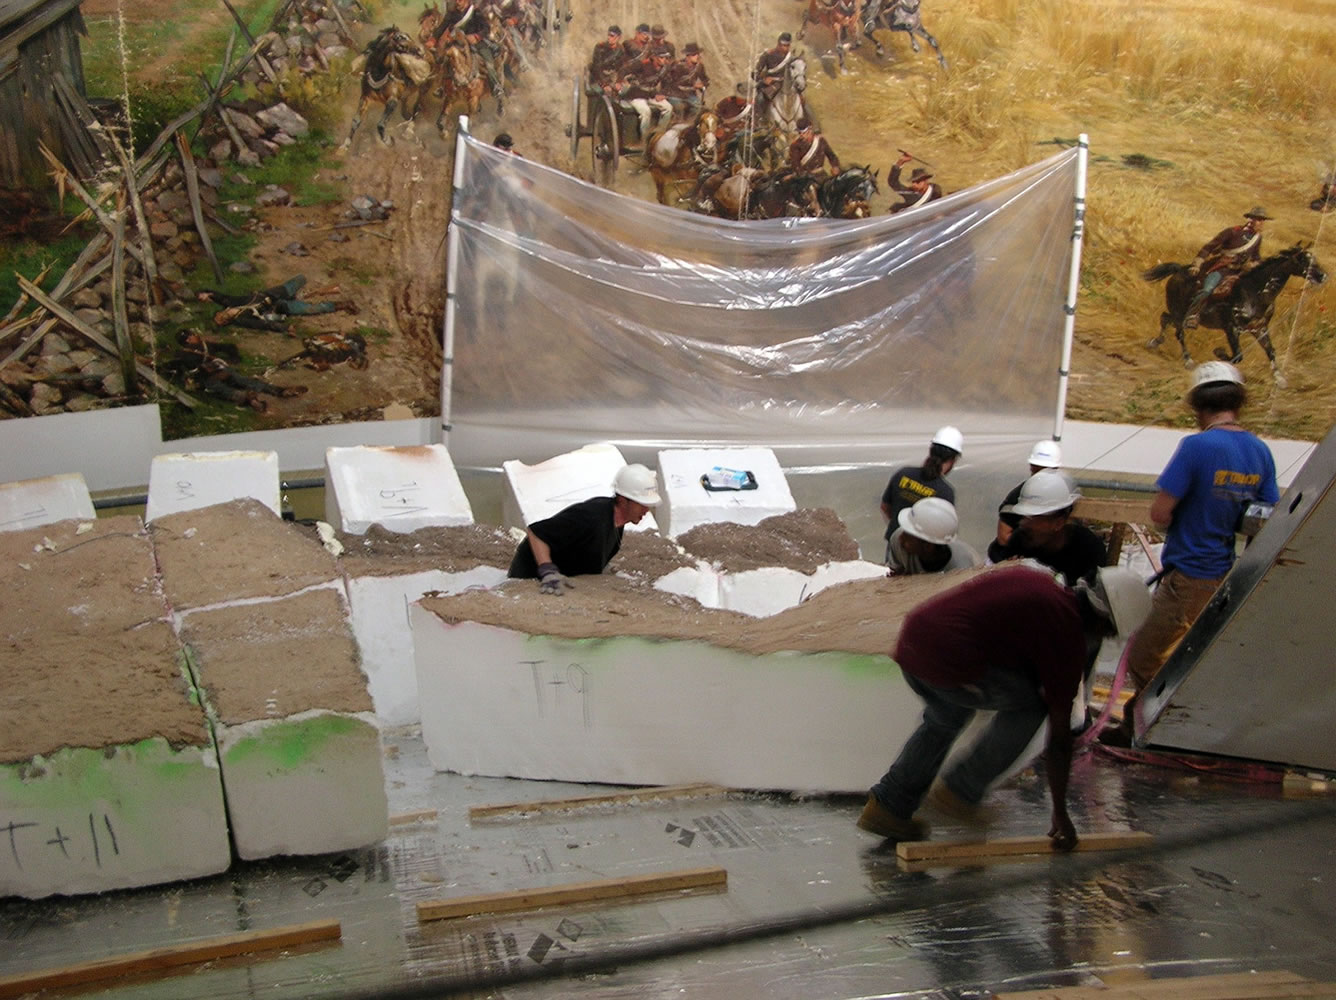 A crew moves pieces of the diorama, which provide a 3-D effect, in front of the cyclorama painting.